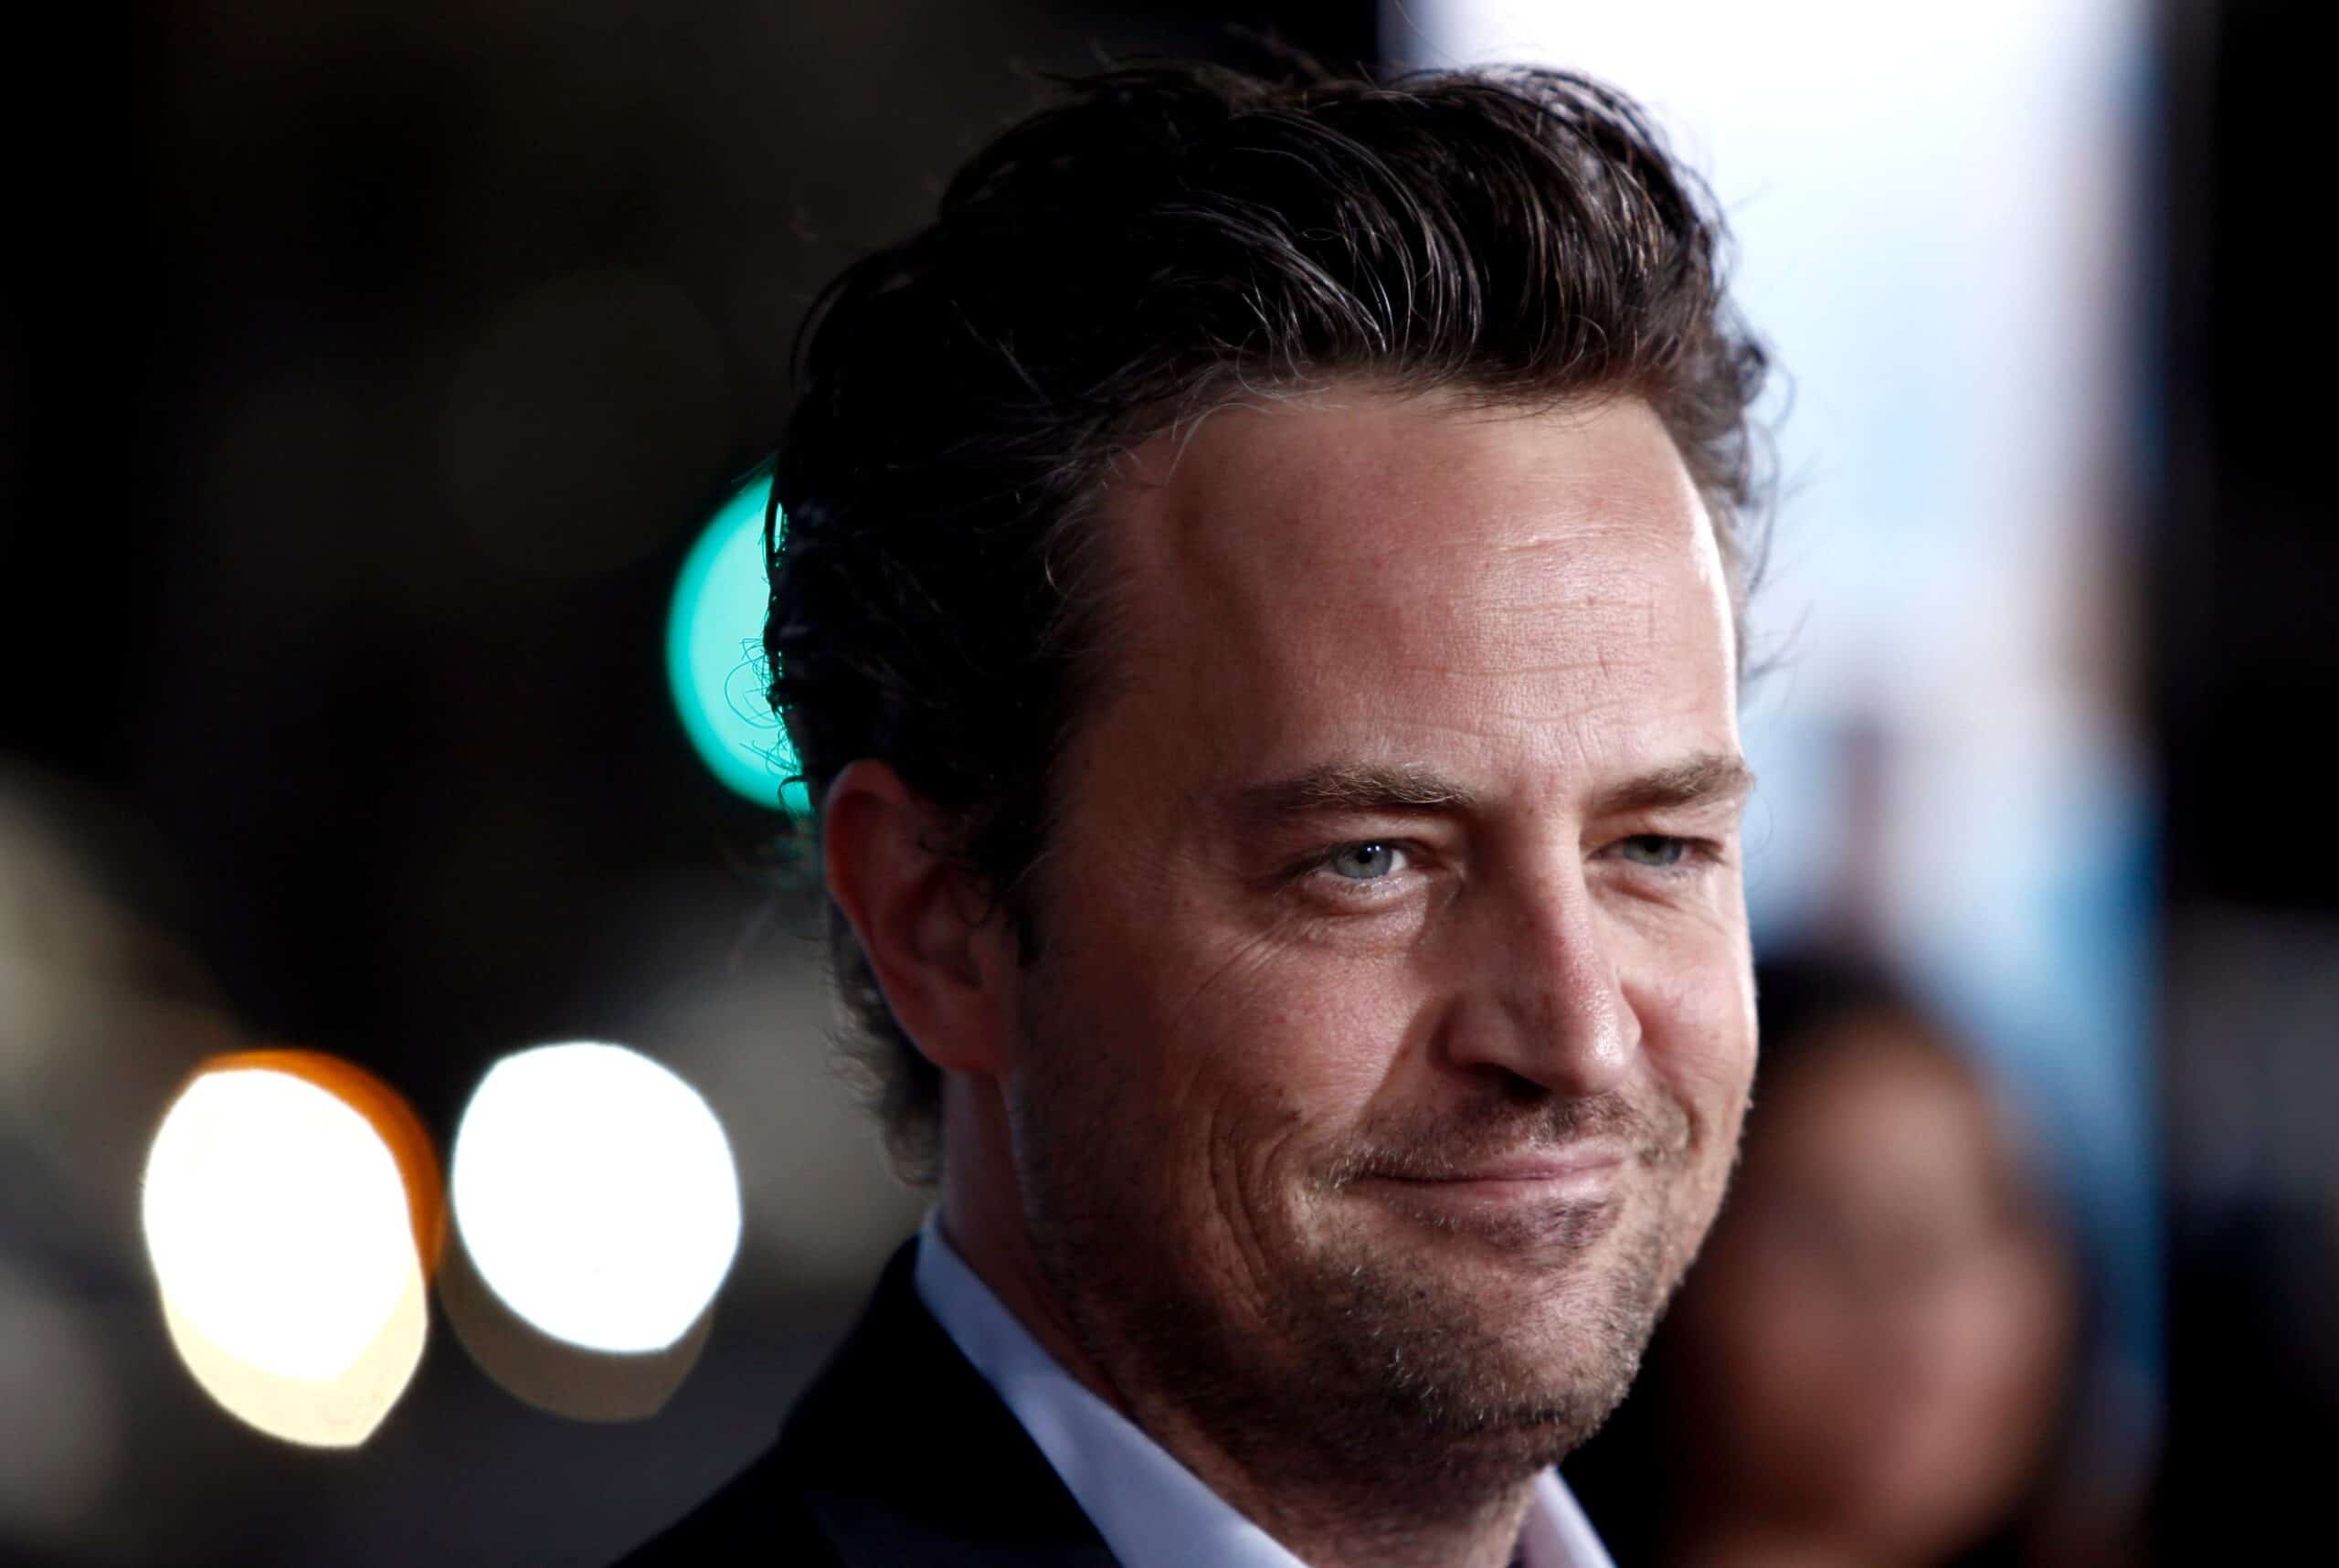 Friends co-stars remember Matthew Perry after death: ‘The world will miss you’